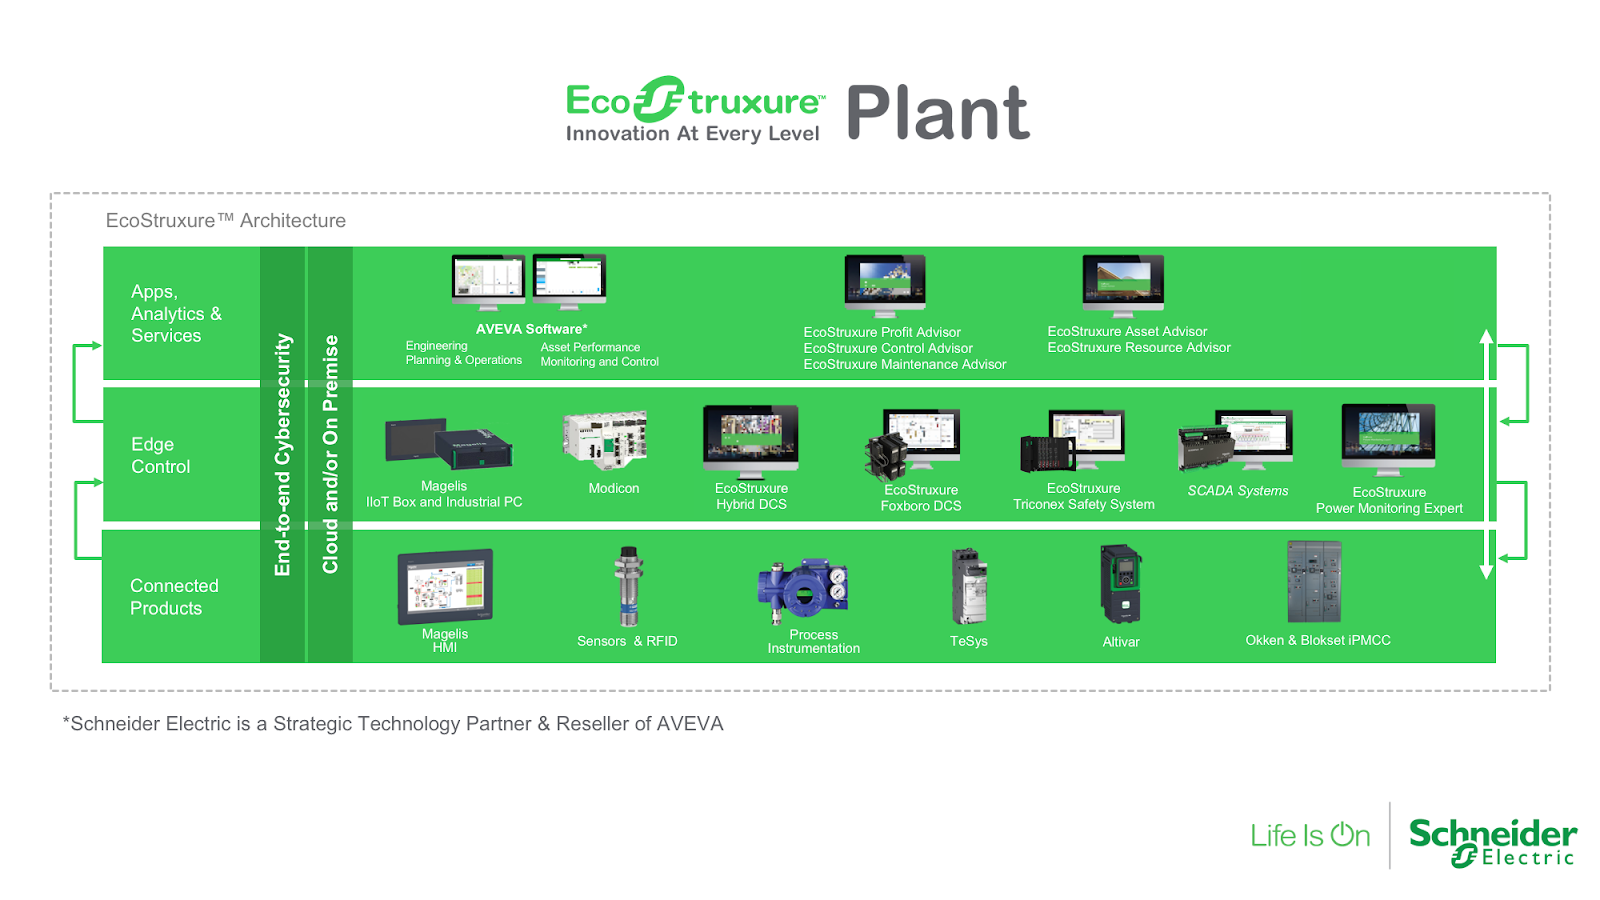 Foxboro: Smart Automation Solutions Provider - Our Comprehensive Plant Solutions